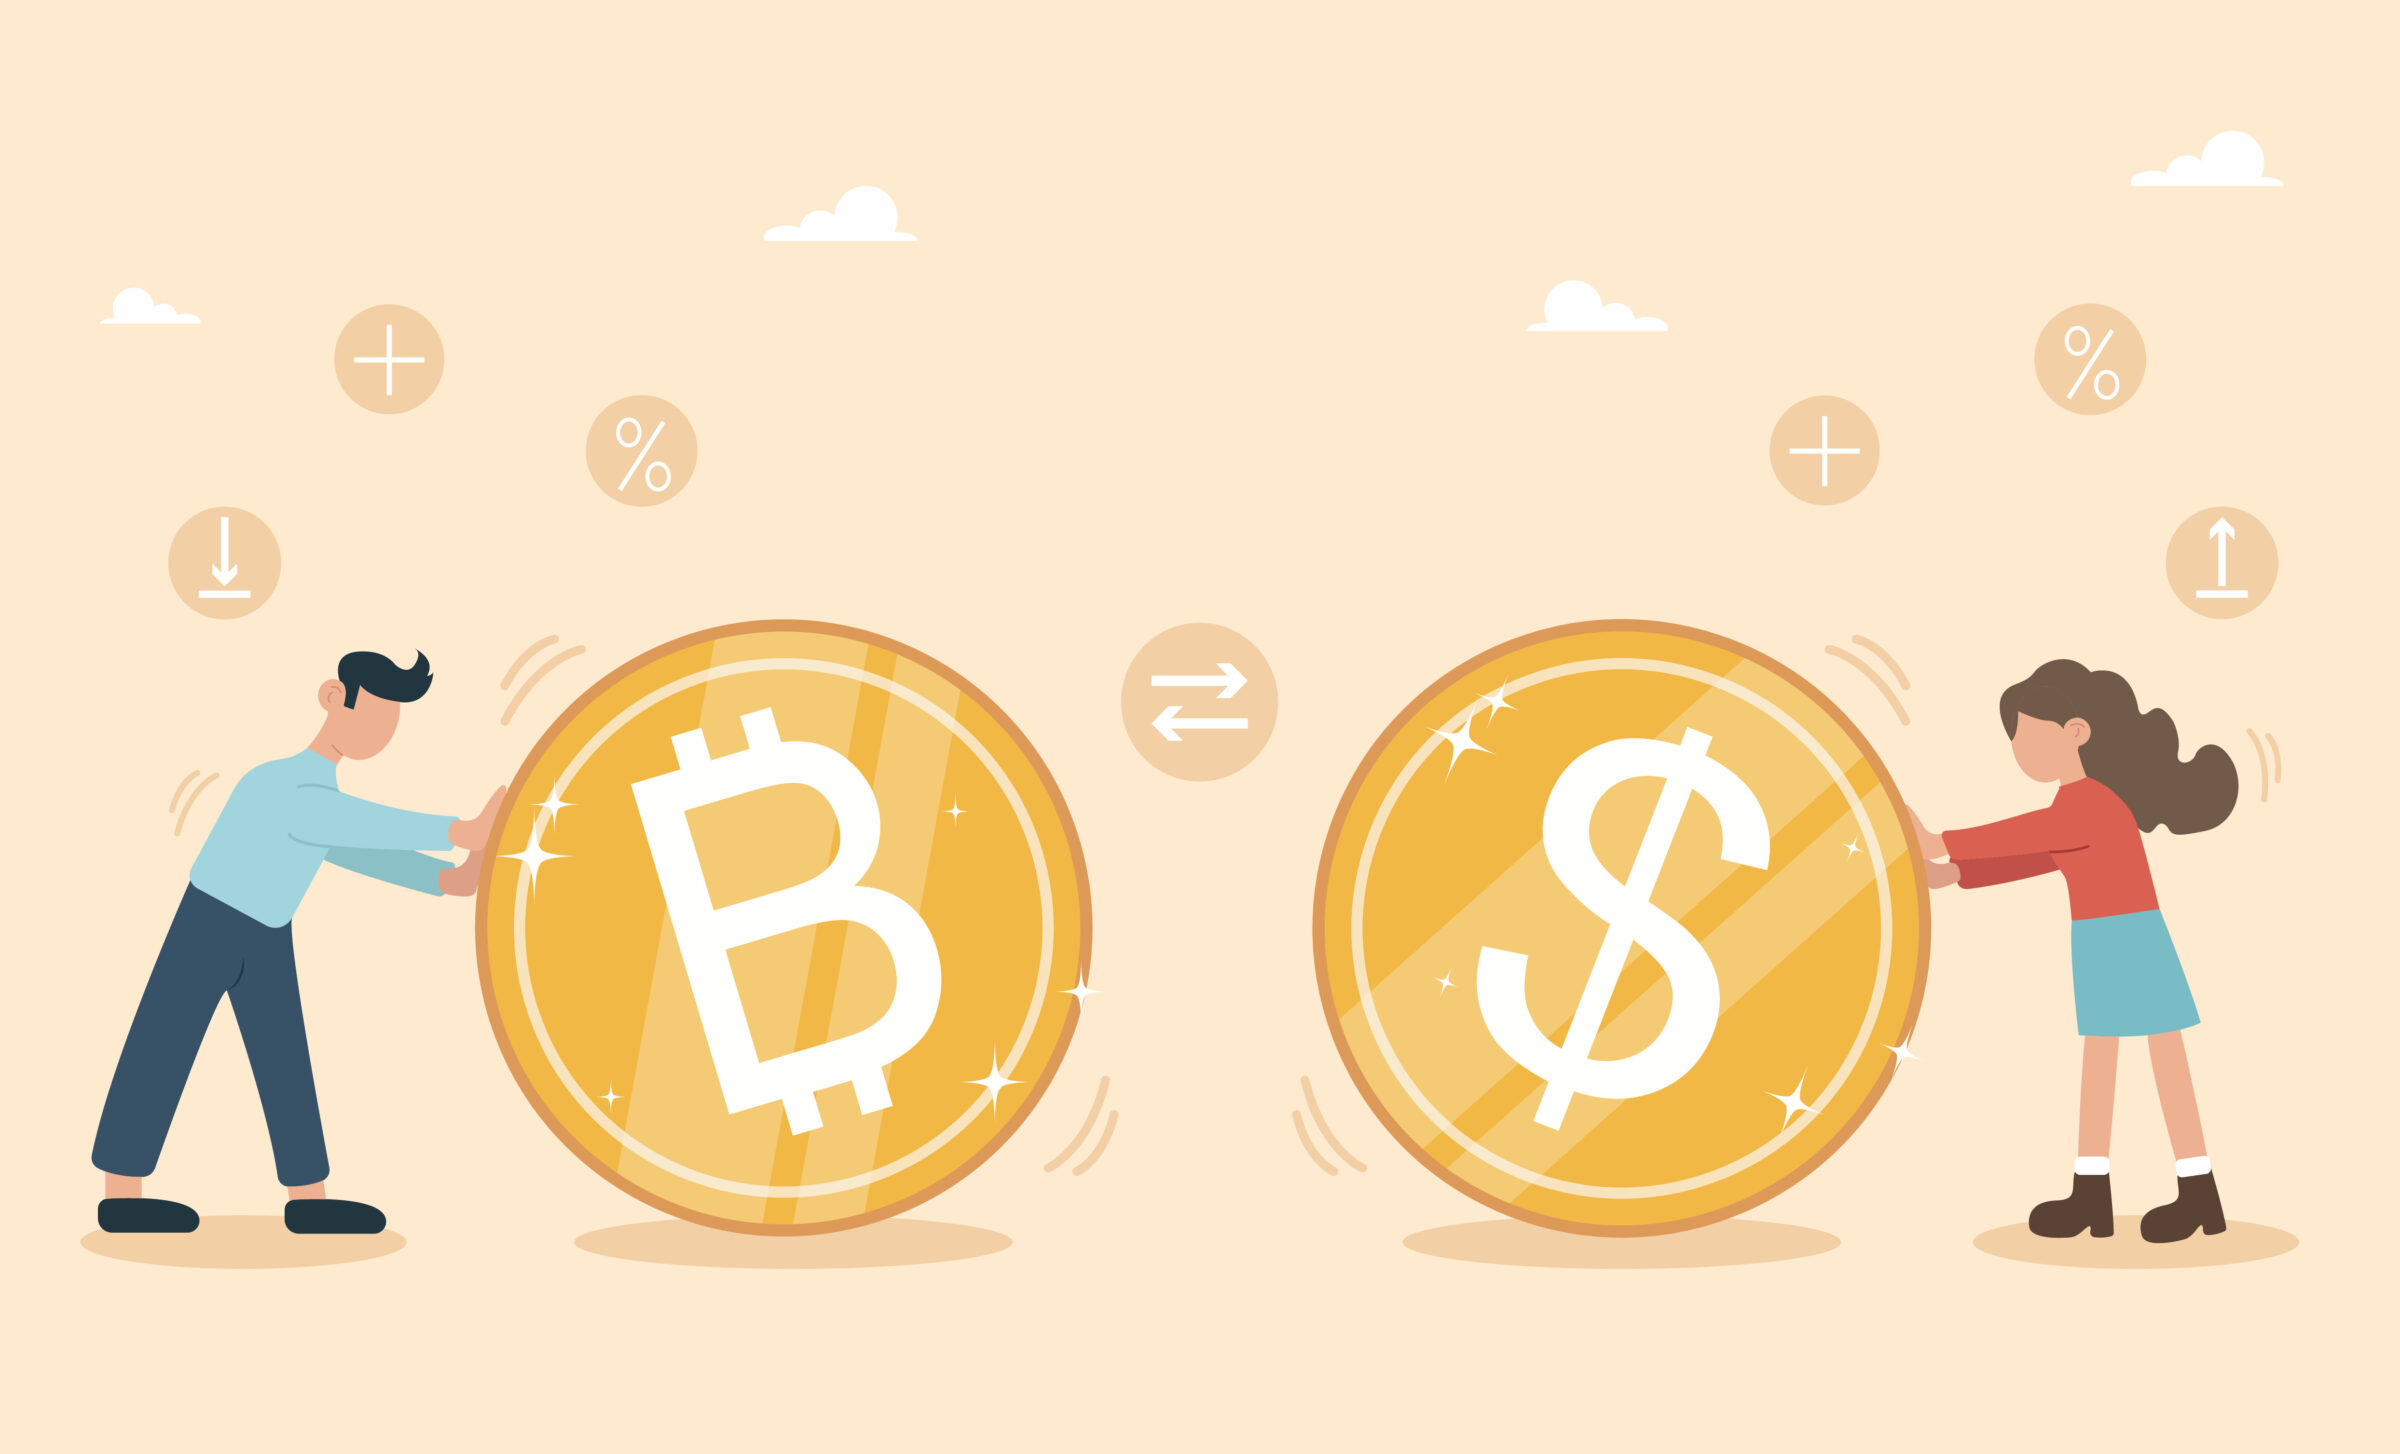 Bitcoin and cryptocurrency value compared to dollar money, dolla